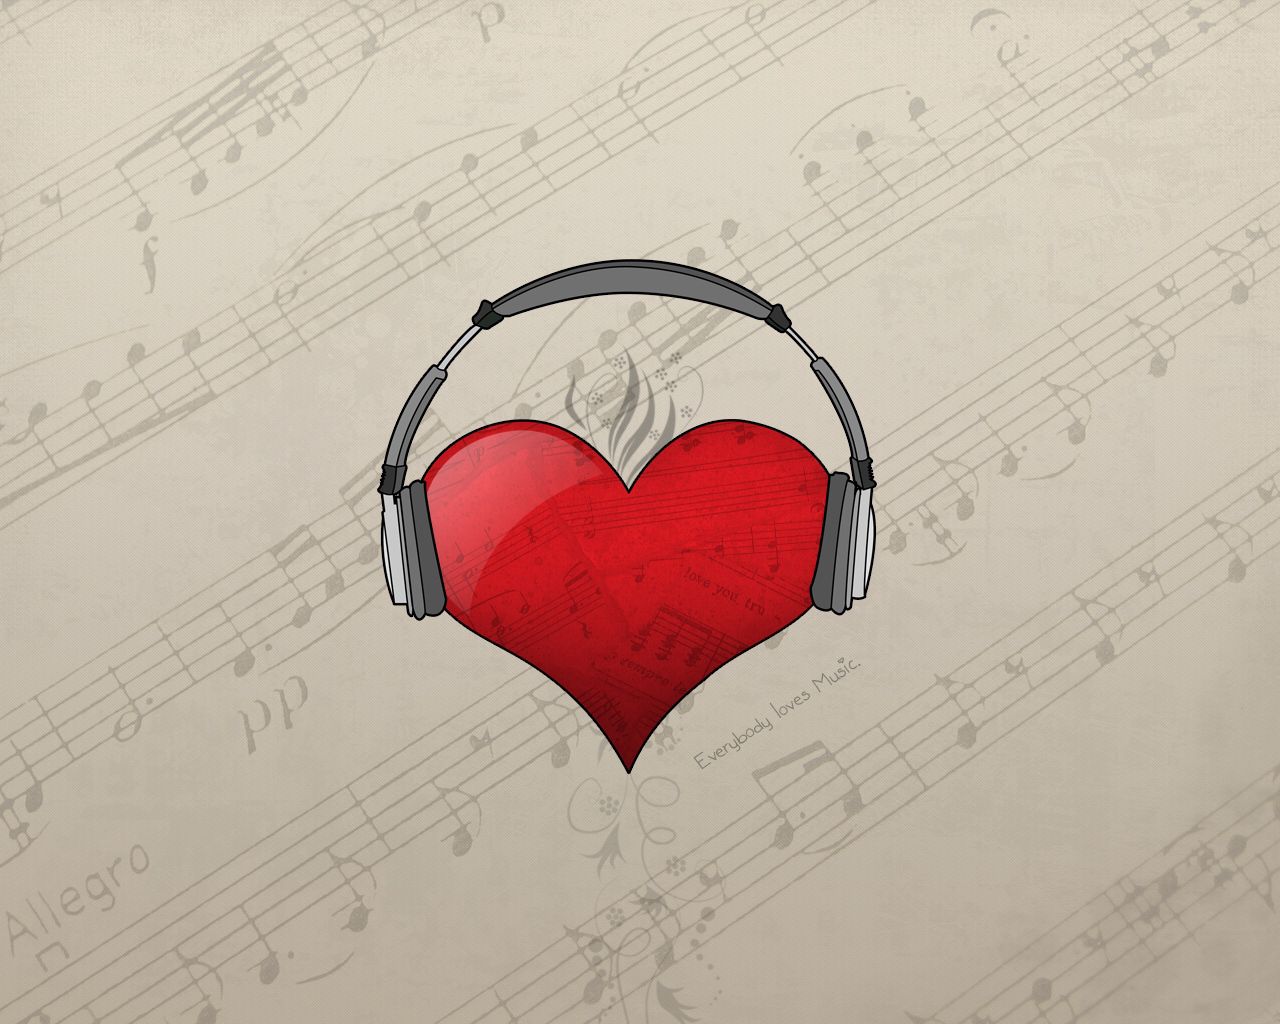 headphones, love, red, picture, drawing, heart cellphone